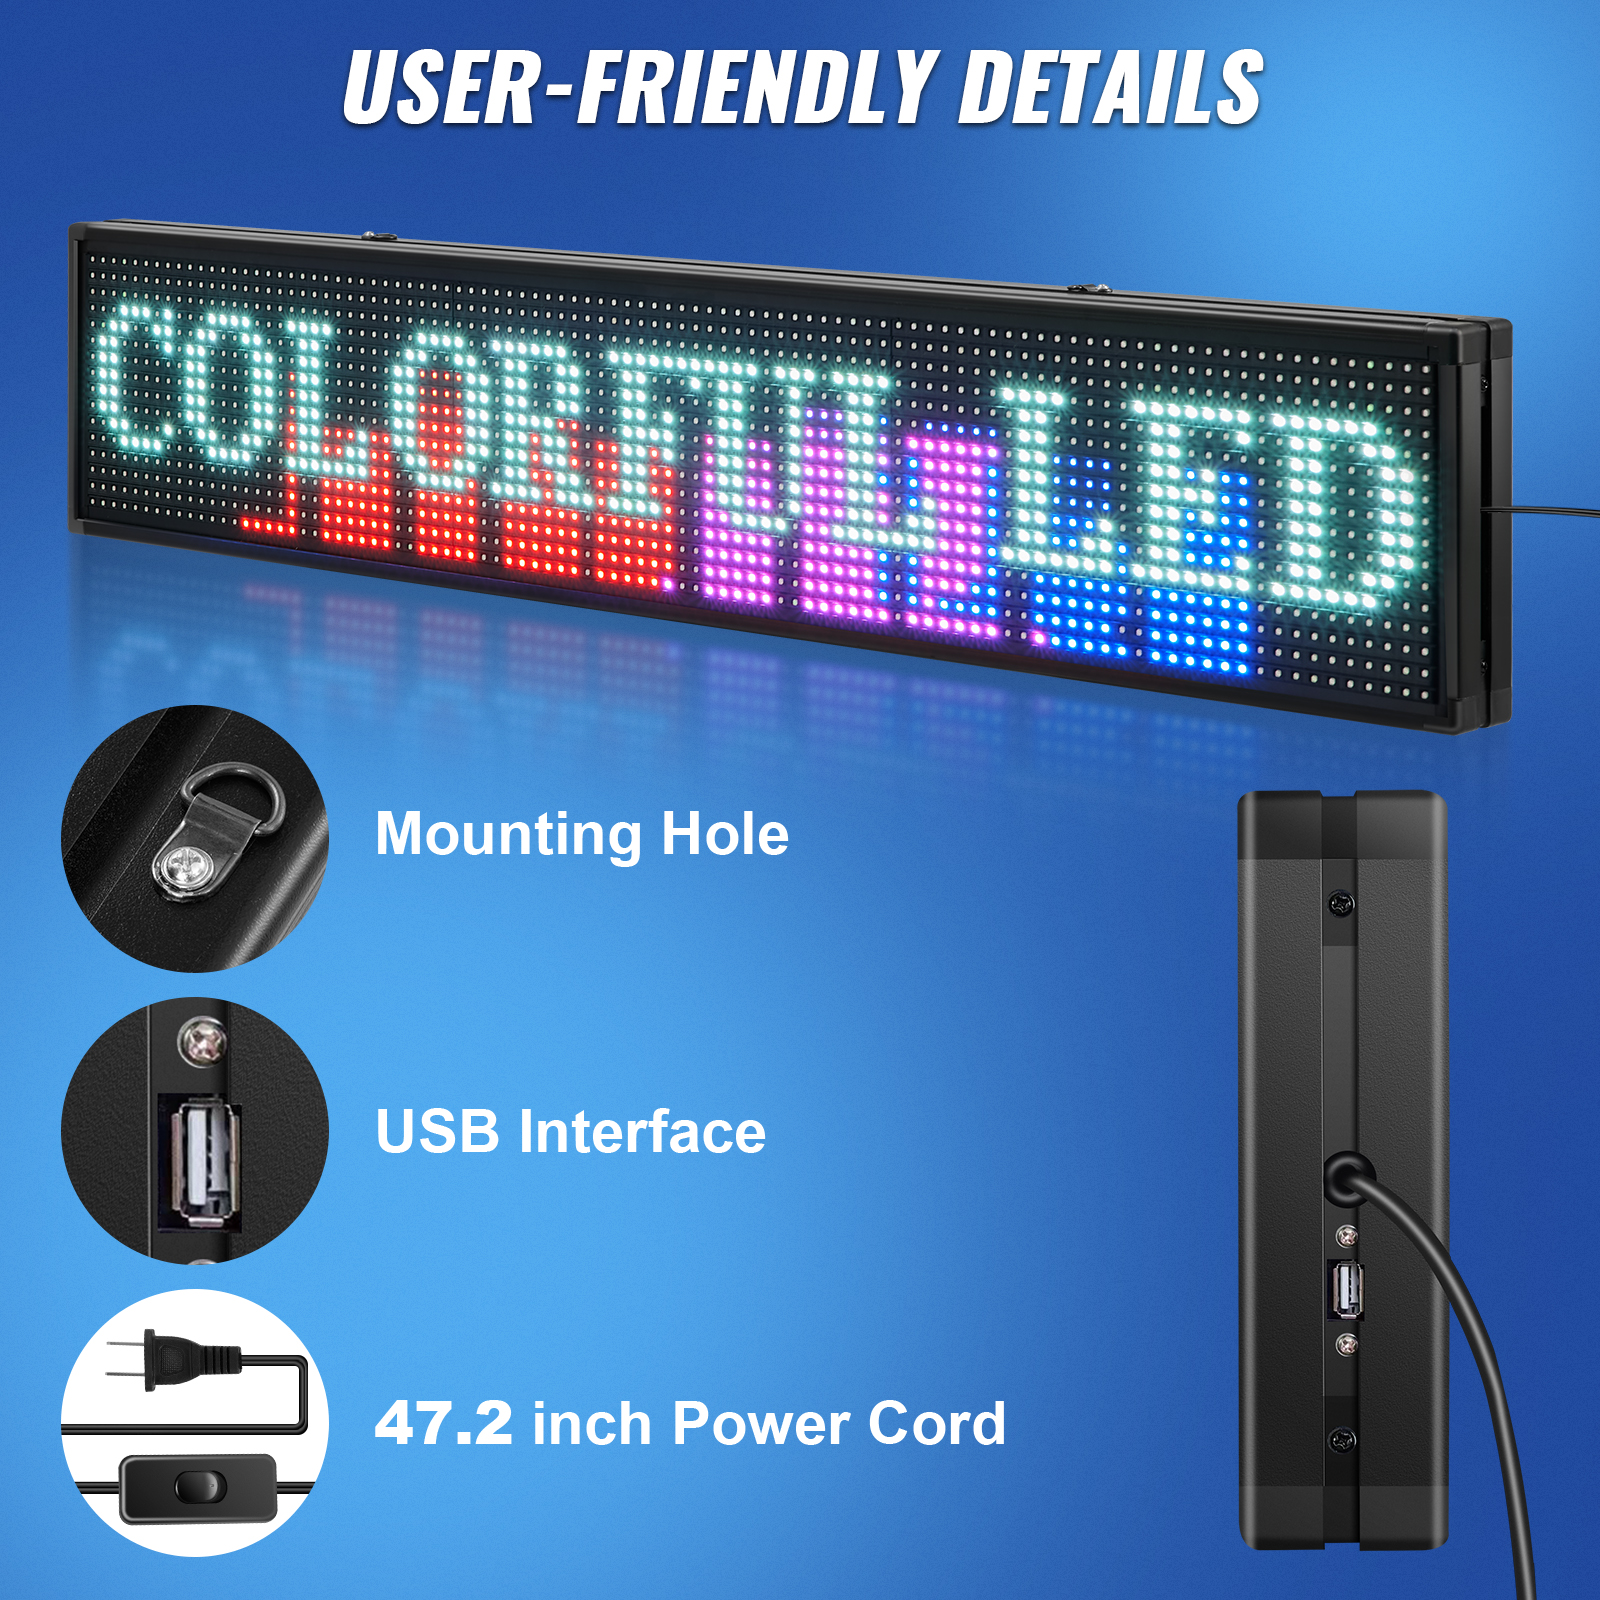 VEVOR Led Sign 40 x 8 inch Led Scrolling Message Display RGB 7-Color P10  Digital Message Display Board Programmable by PC& WiFi & USB with SMD  Technology for Advertising and Business